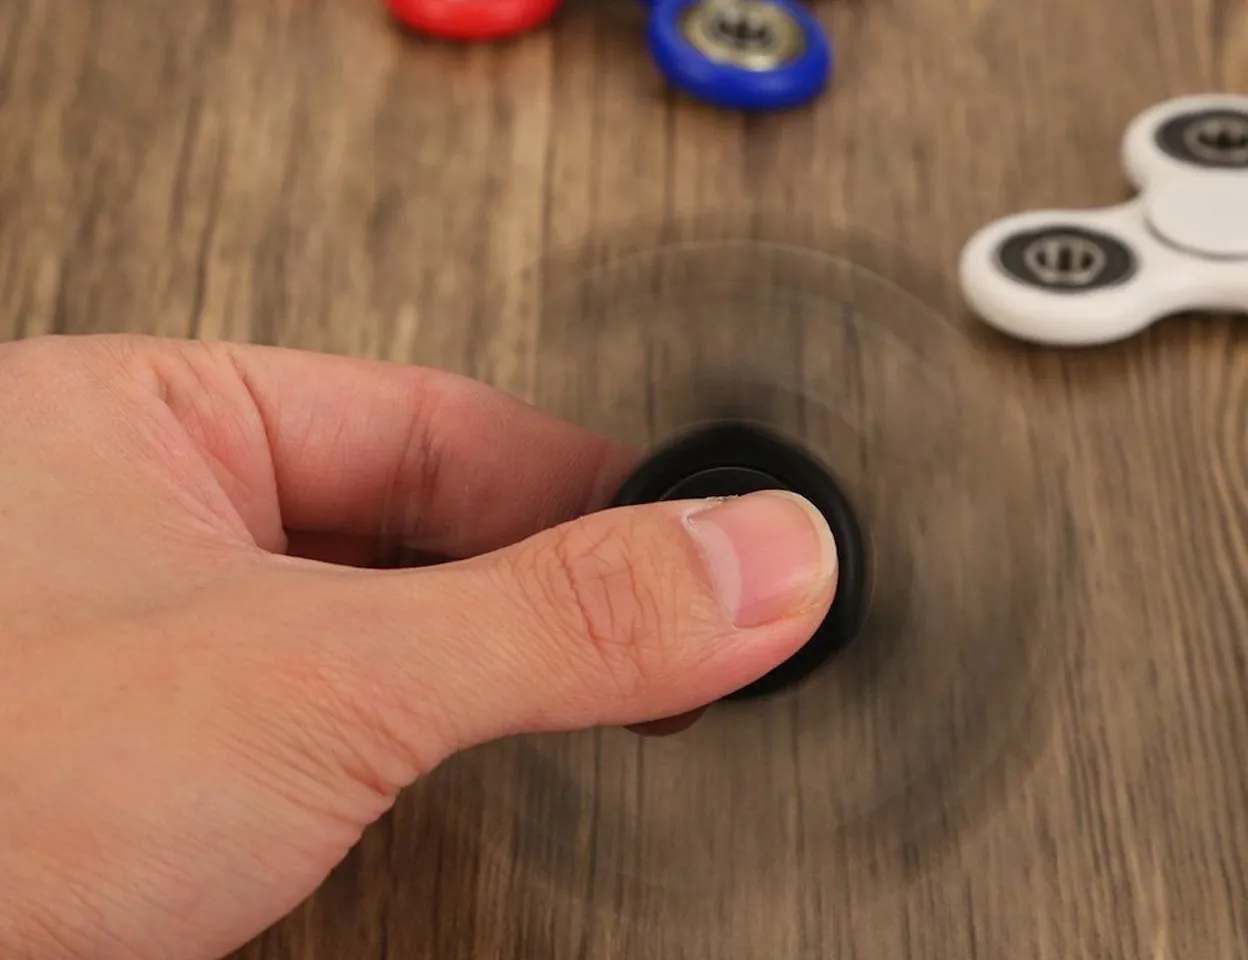 Fidgety Are You? Fidgeting Just Became Cooler With This!